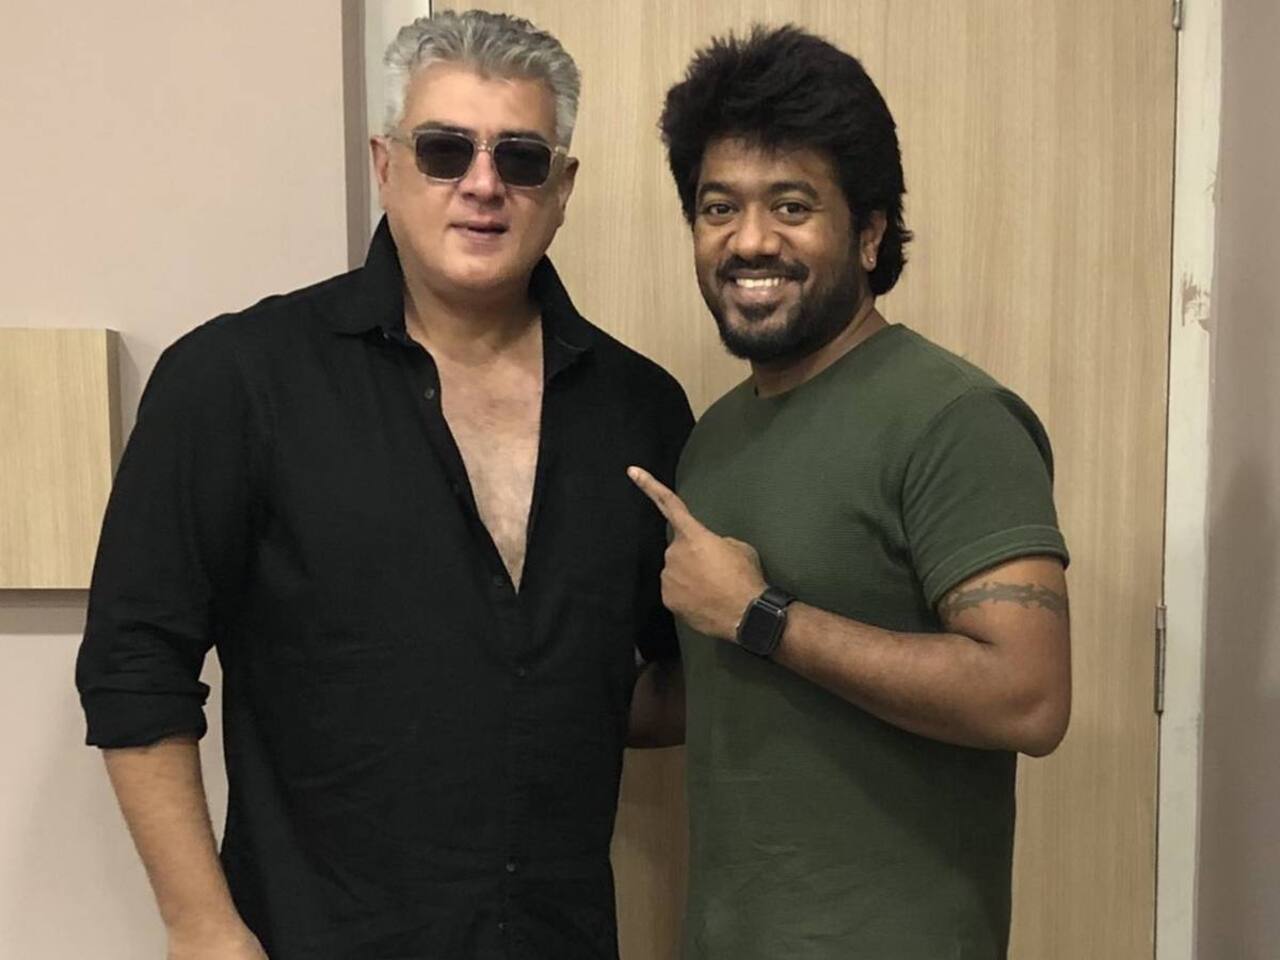 AK62: Ajith Kumar and Vignesh Shivan's action film shoot pushed? Here's all we know about the project